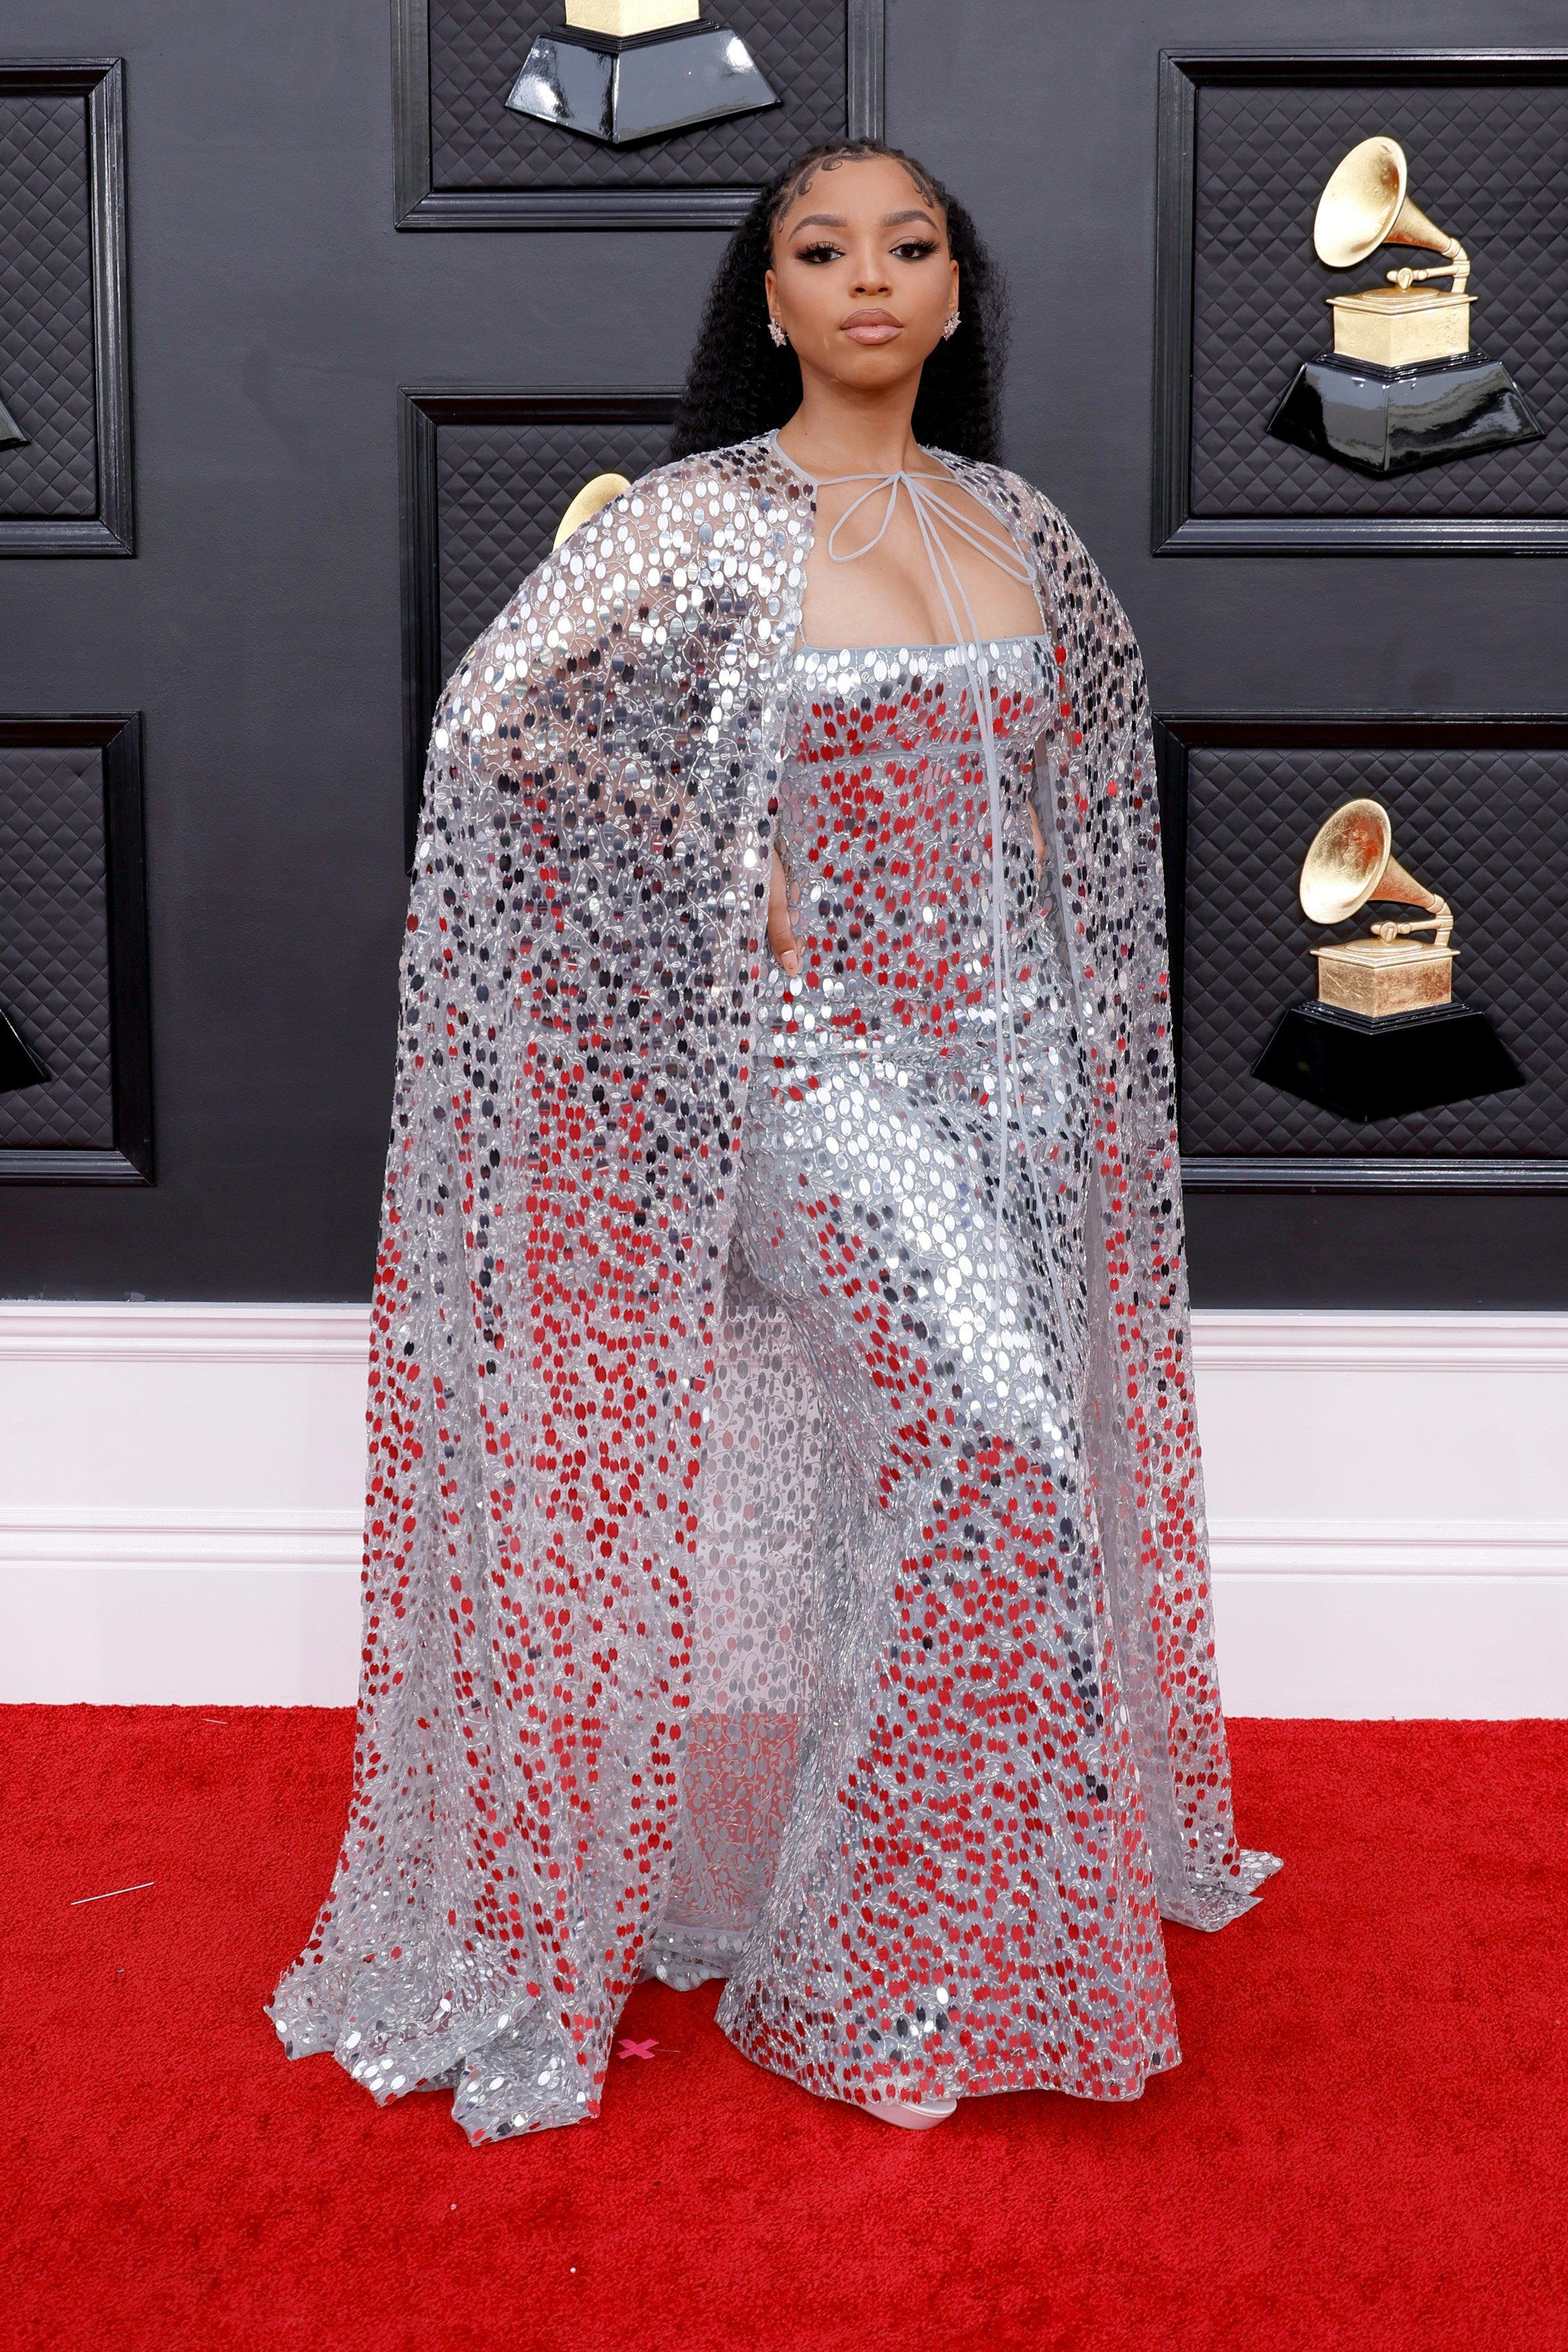 The Best Dressed Stars at the Grammys 2022